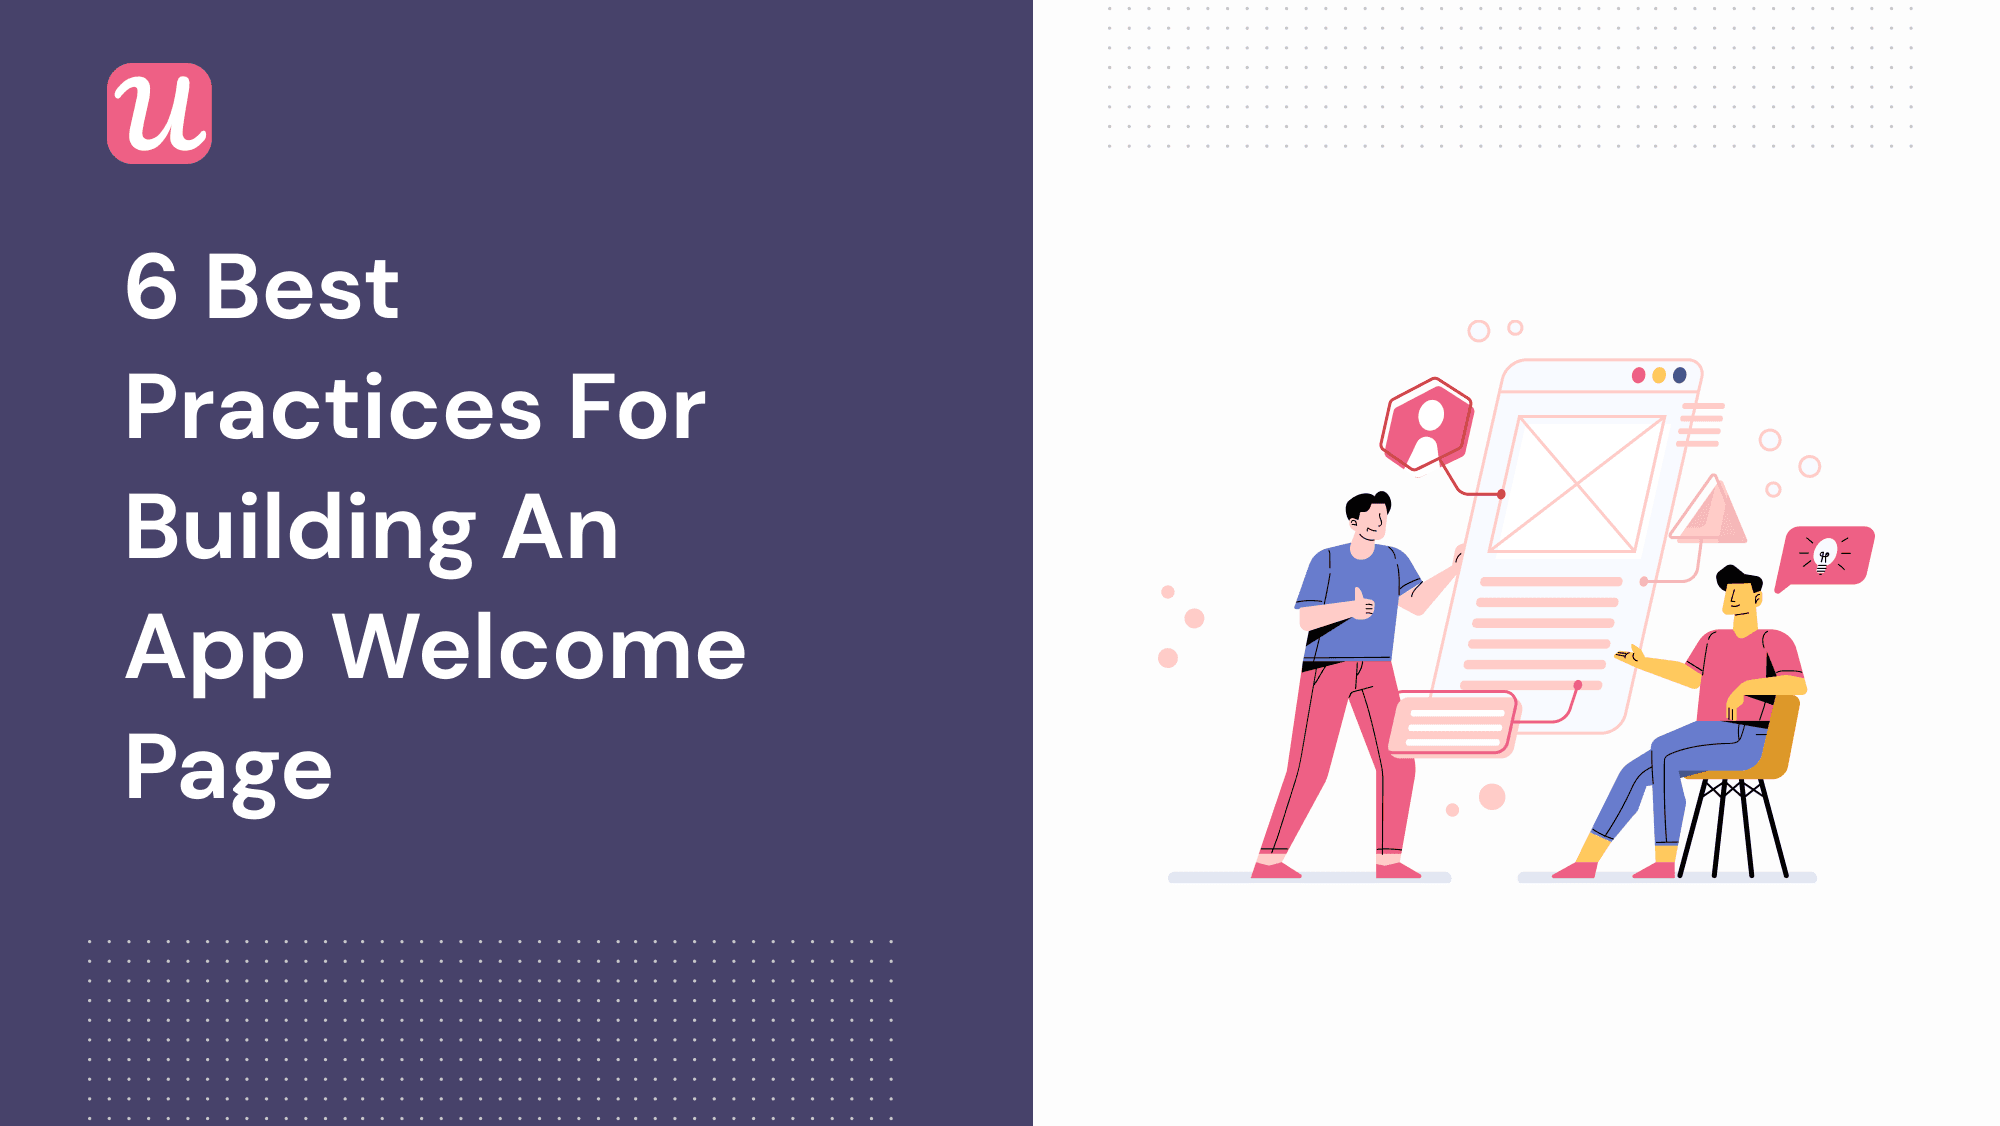 6 Best Practices for Building an App Welcome Page